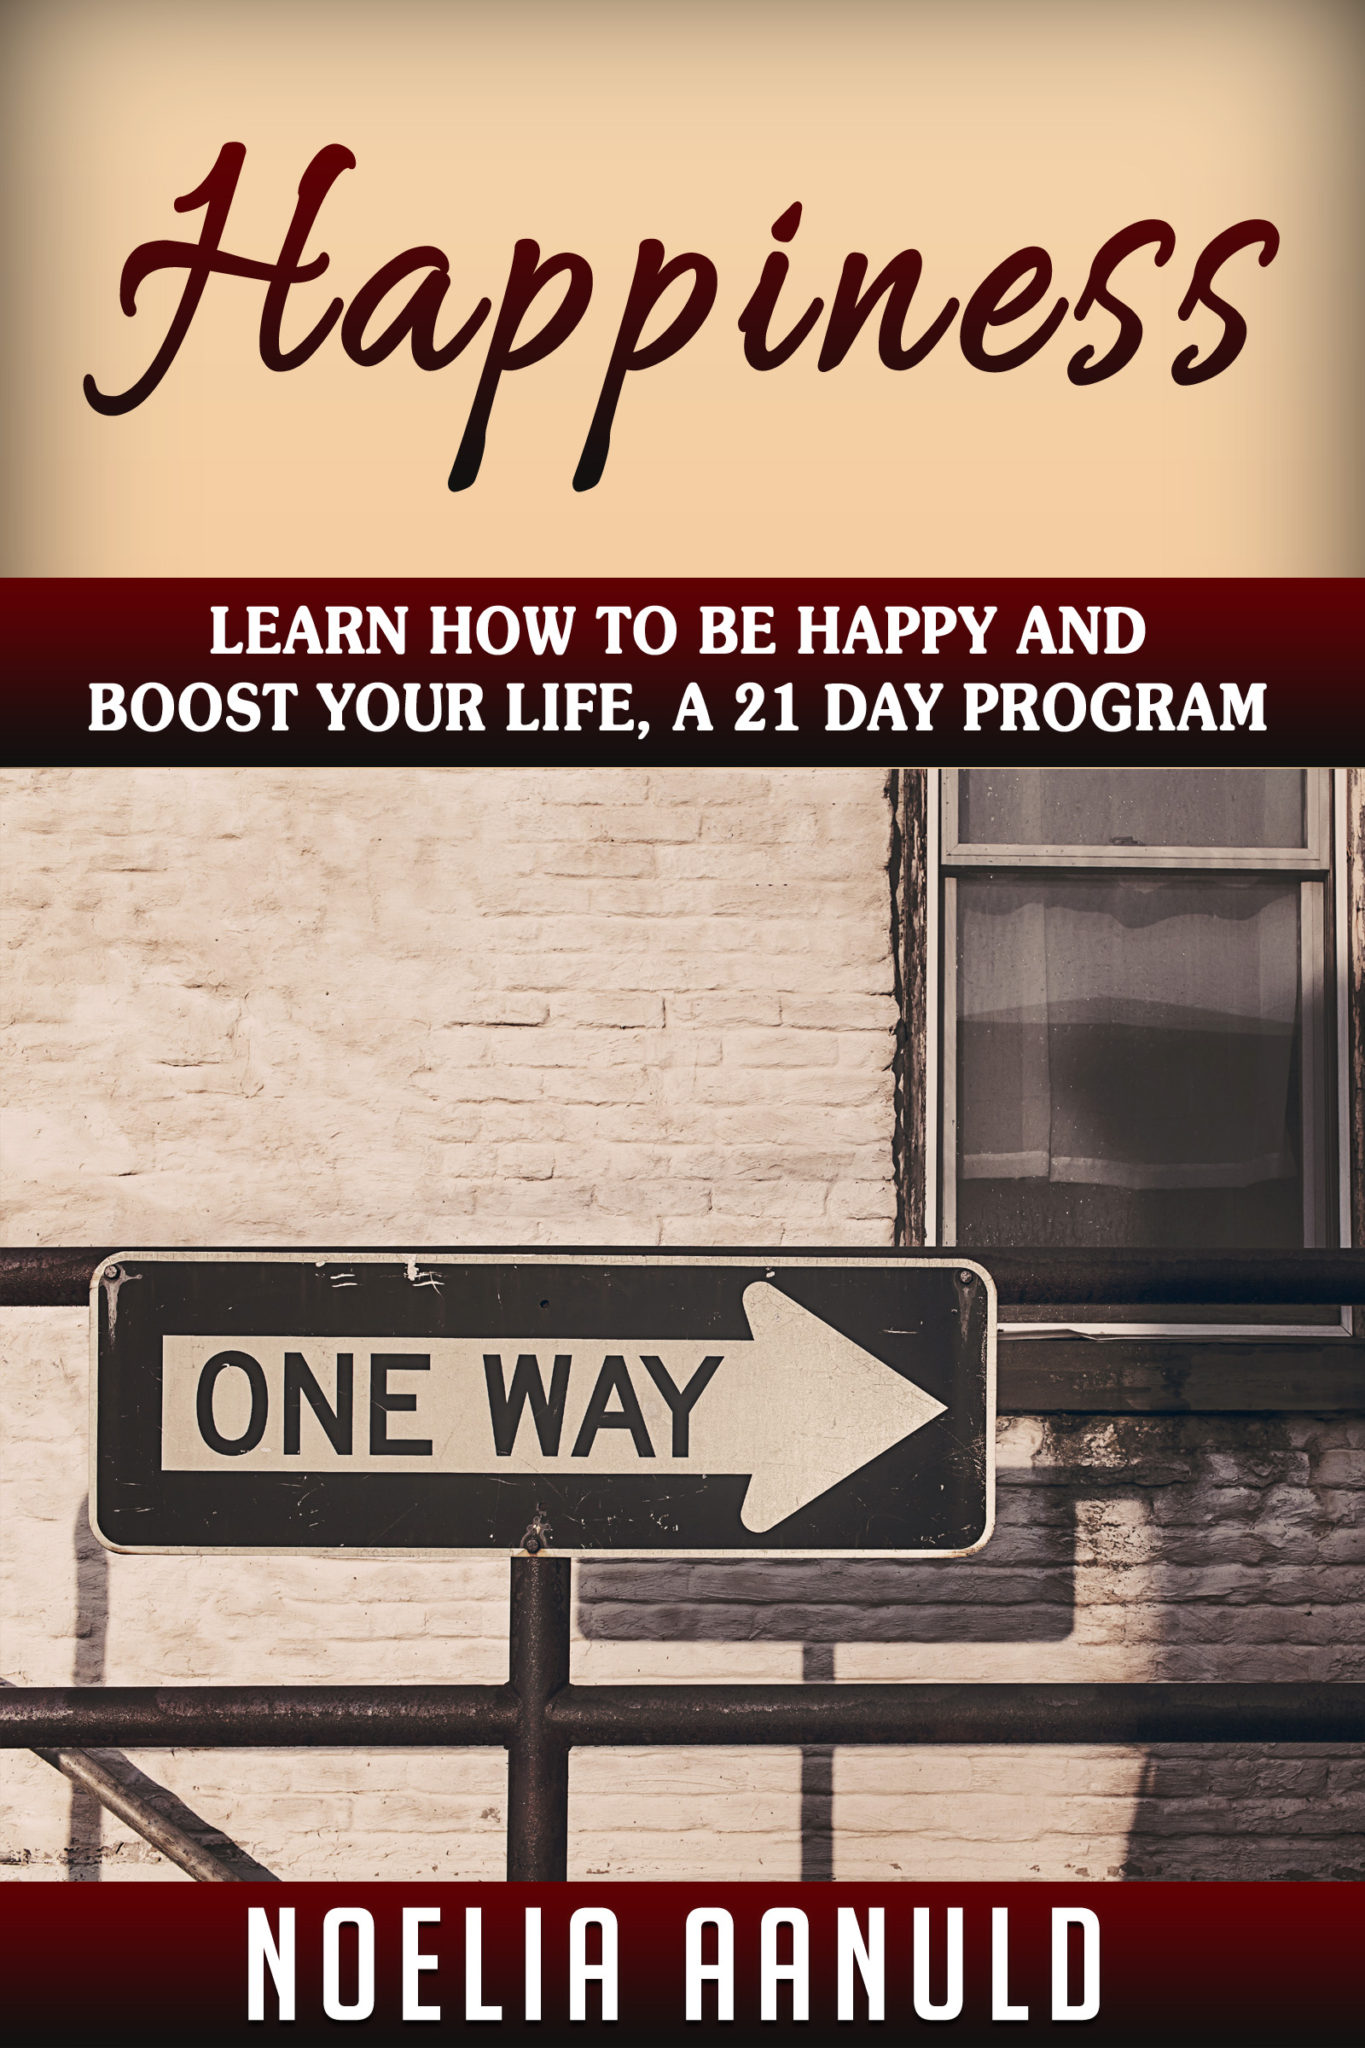 FREE: Happiness: Learn How To Be Happy And Boost Your Life, A 21 Day Program by Noelia Aanulds